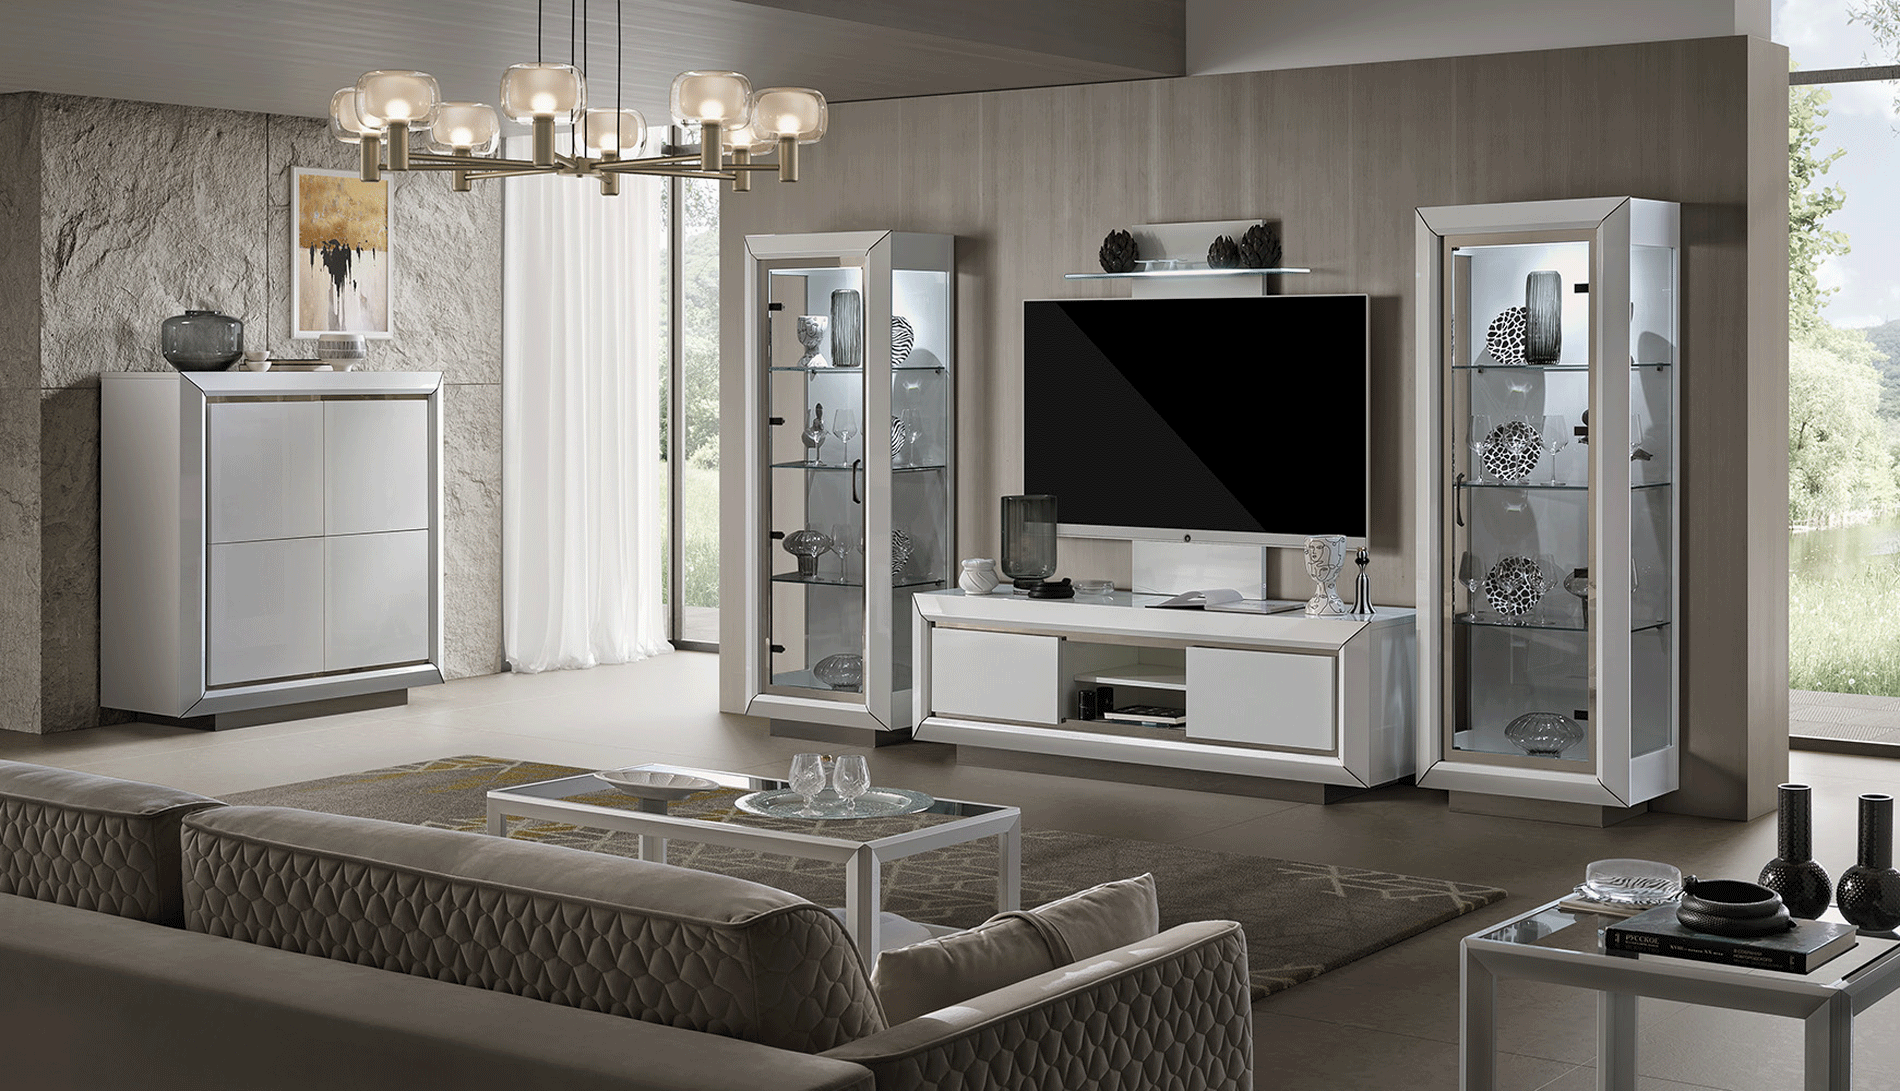 Dining Room Furniture Modern Dining Room Sets Elite WHITE Entertainment center Additional items